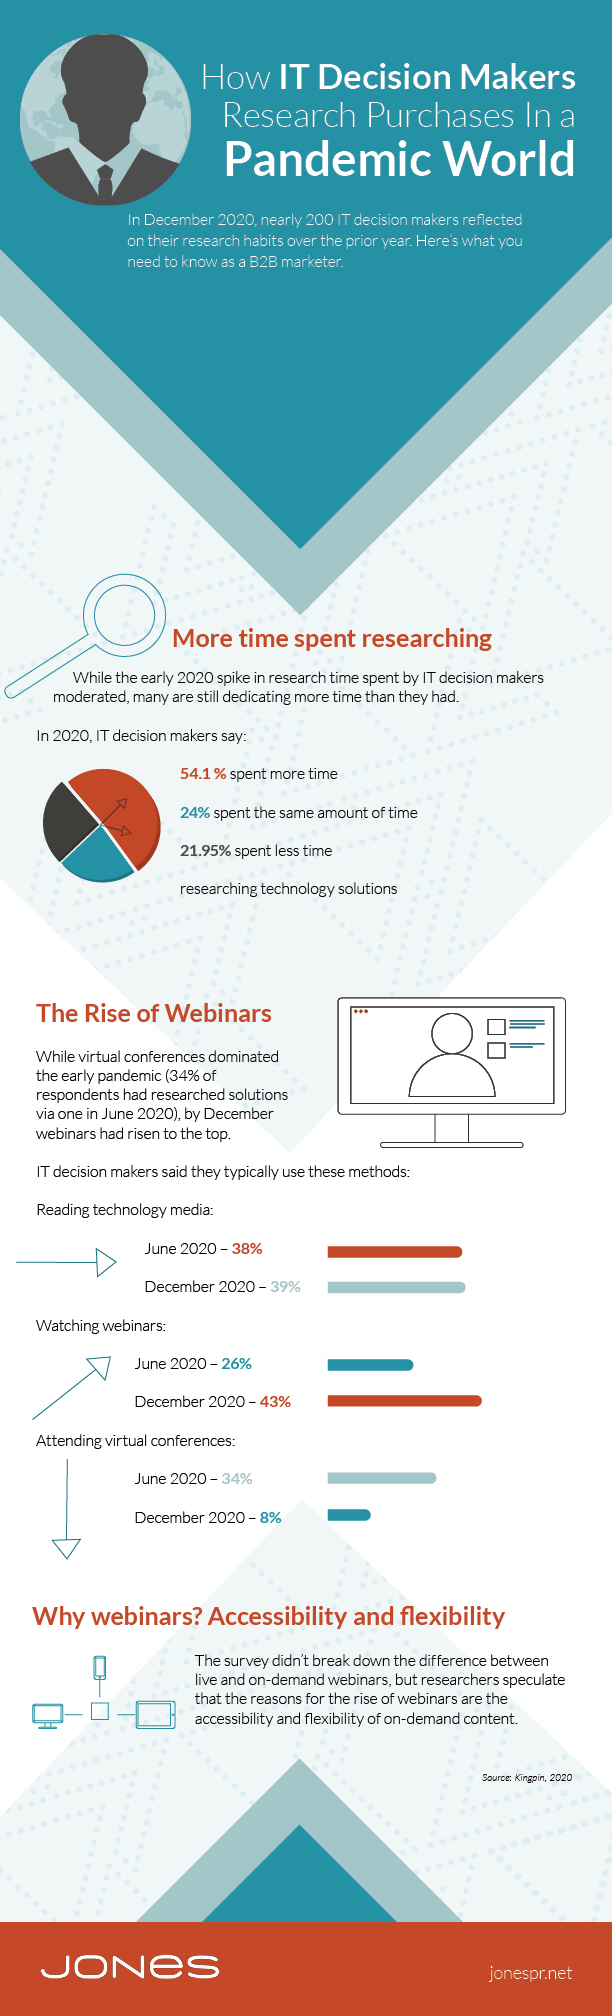 B2B Marketing Reaching IT Decision Makers in 2021 (infographic) - Infographic